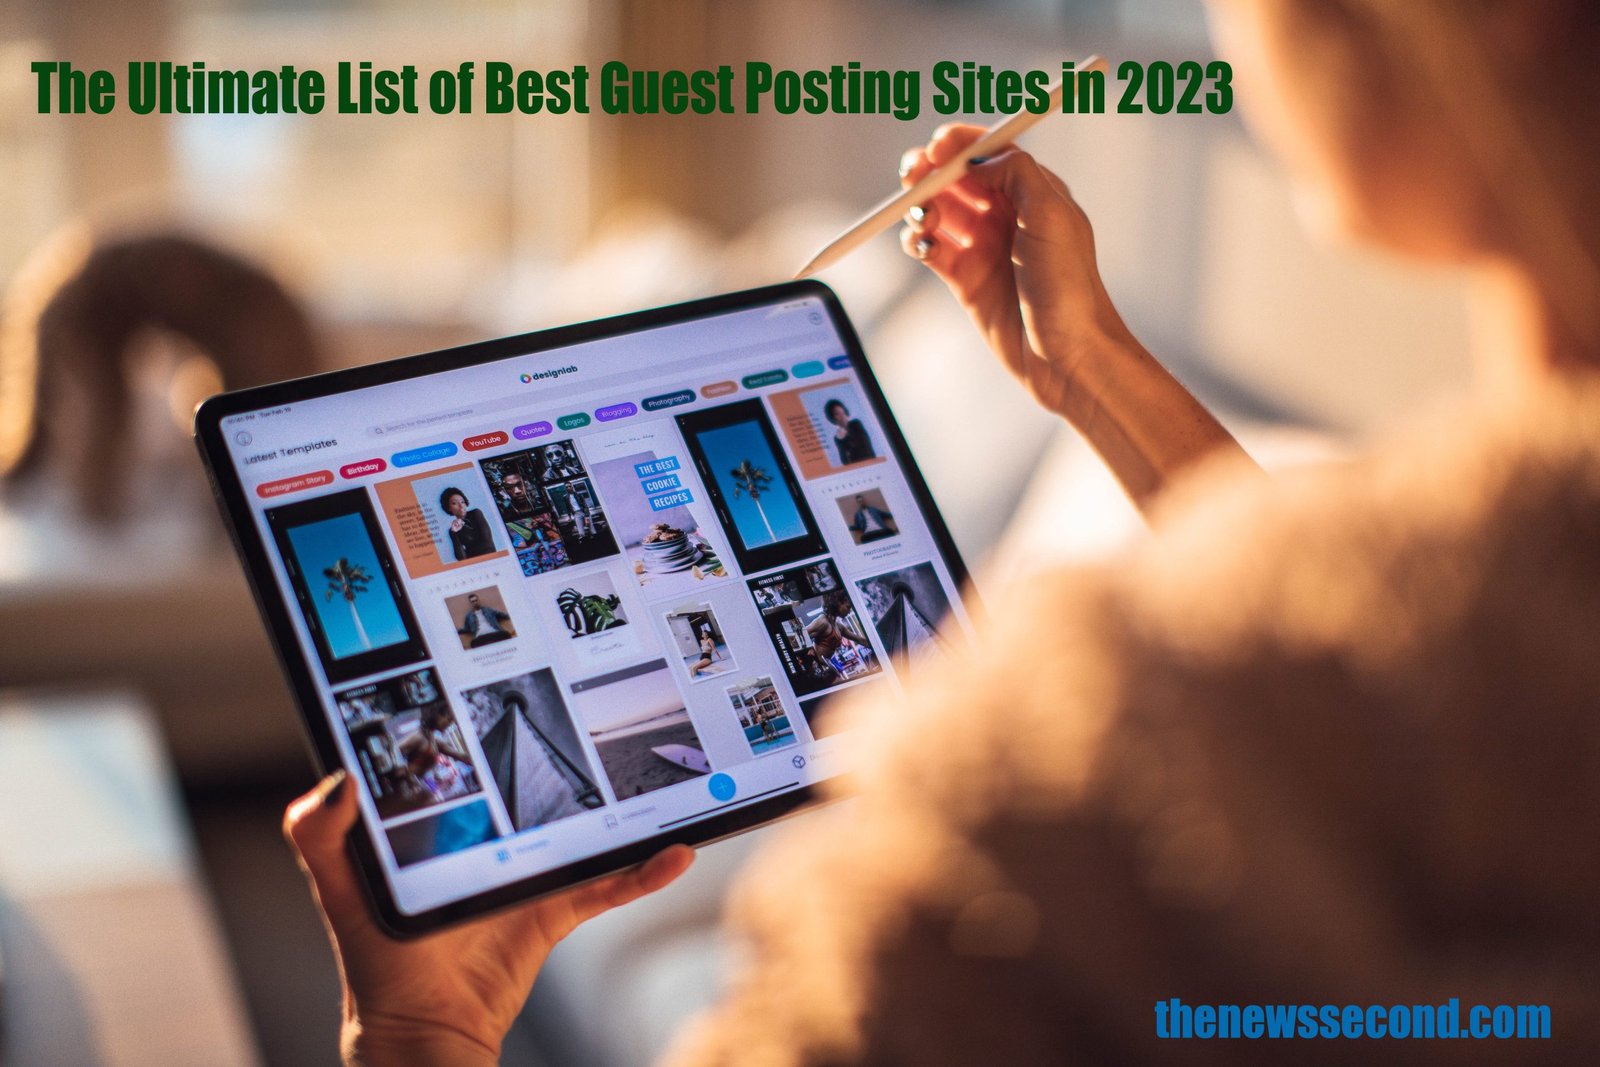 The Ultimate List of Best Guest Posting Sites in 2023